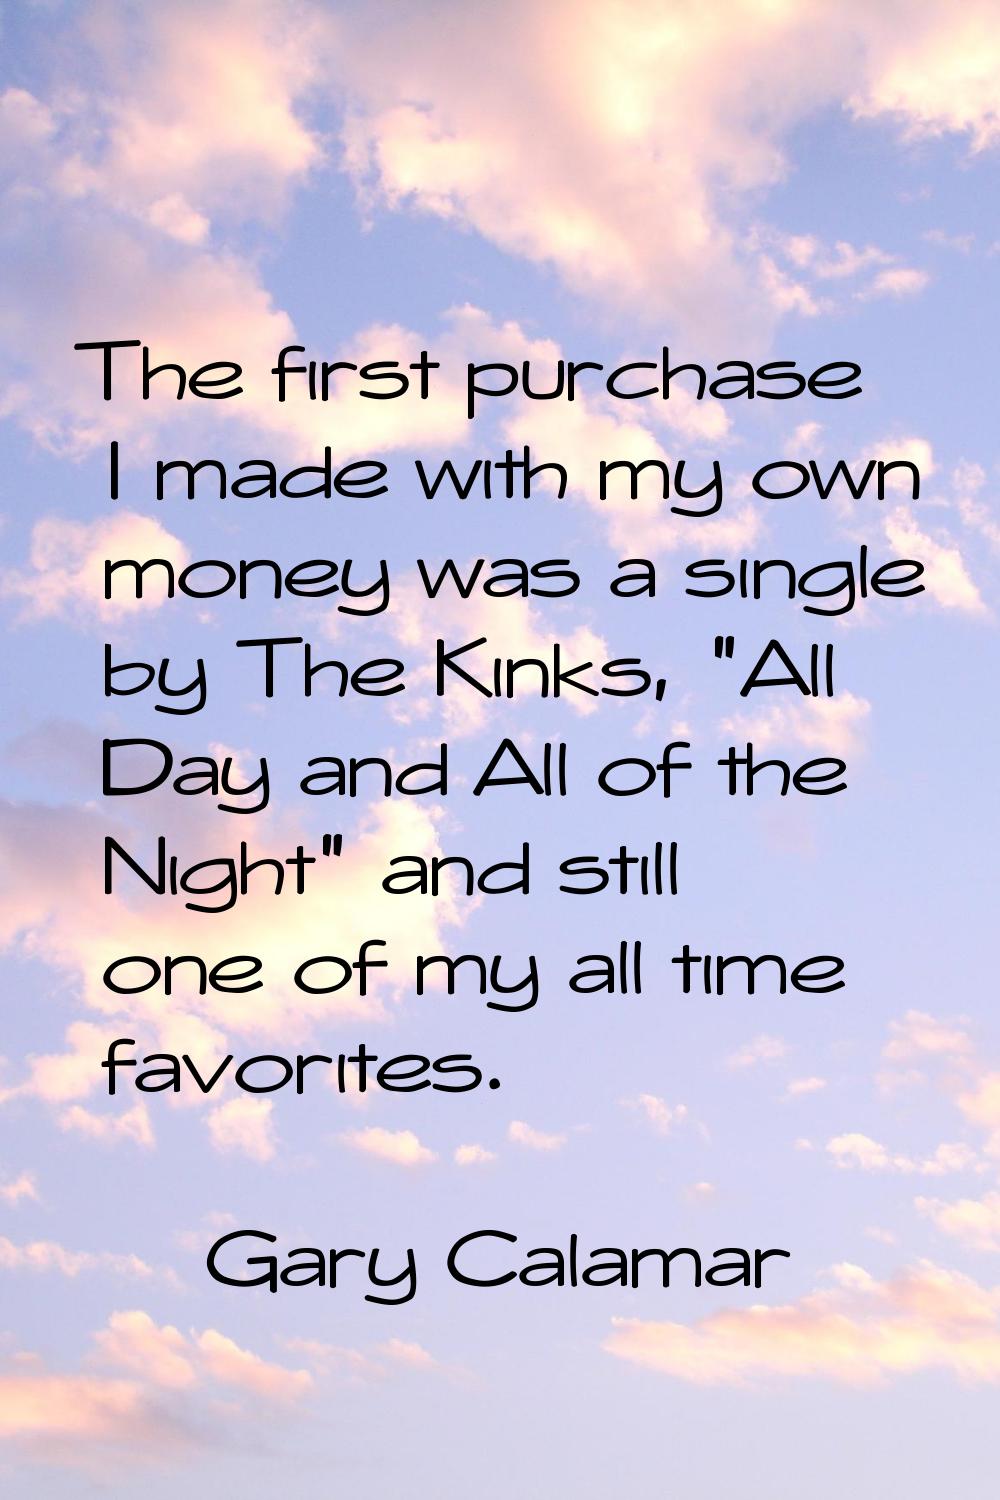 The first purchase I made with my own money was a single by The Kinks, "All Day and All of the Nigh